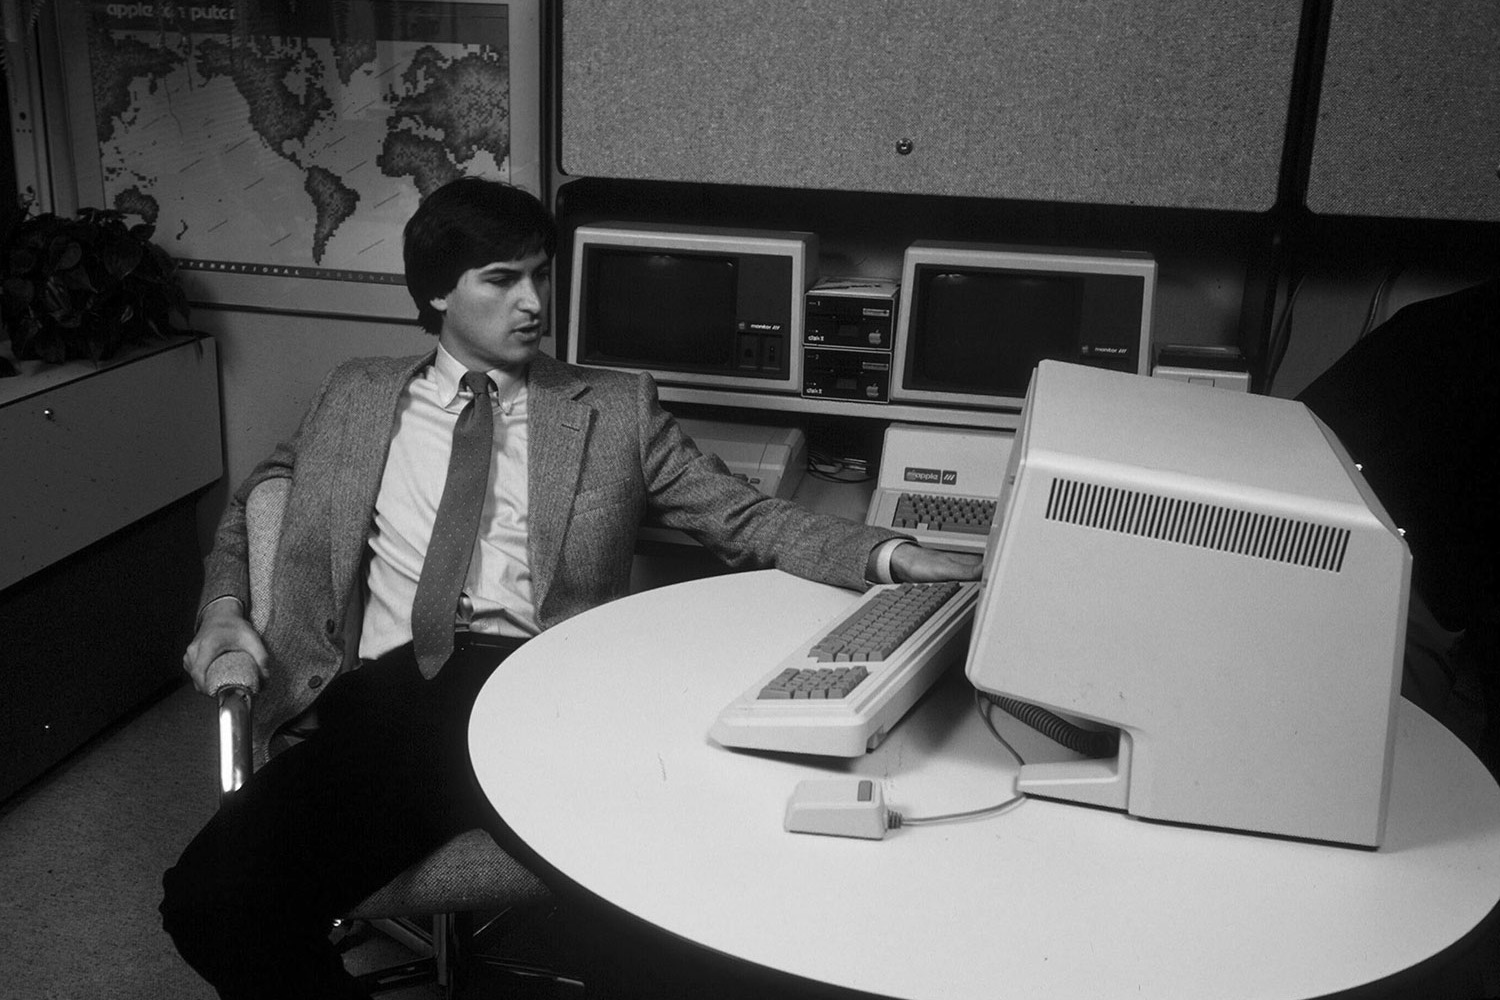 Jobs with the Lisa, an early — and revolutionary — Apple computer, in 1982.